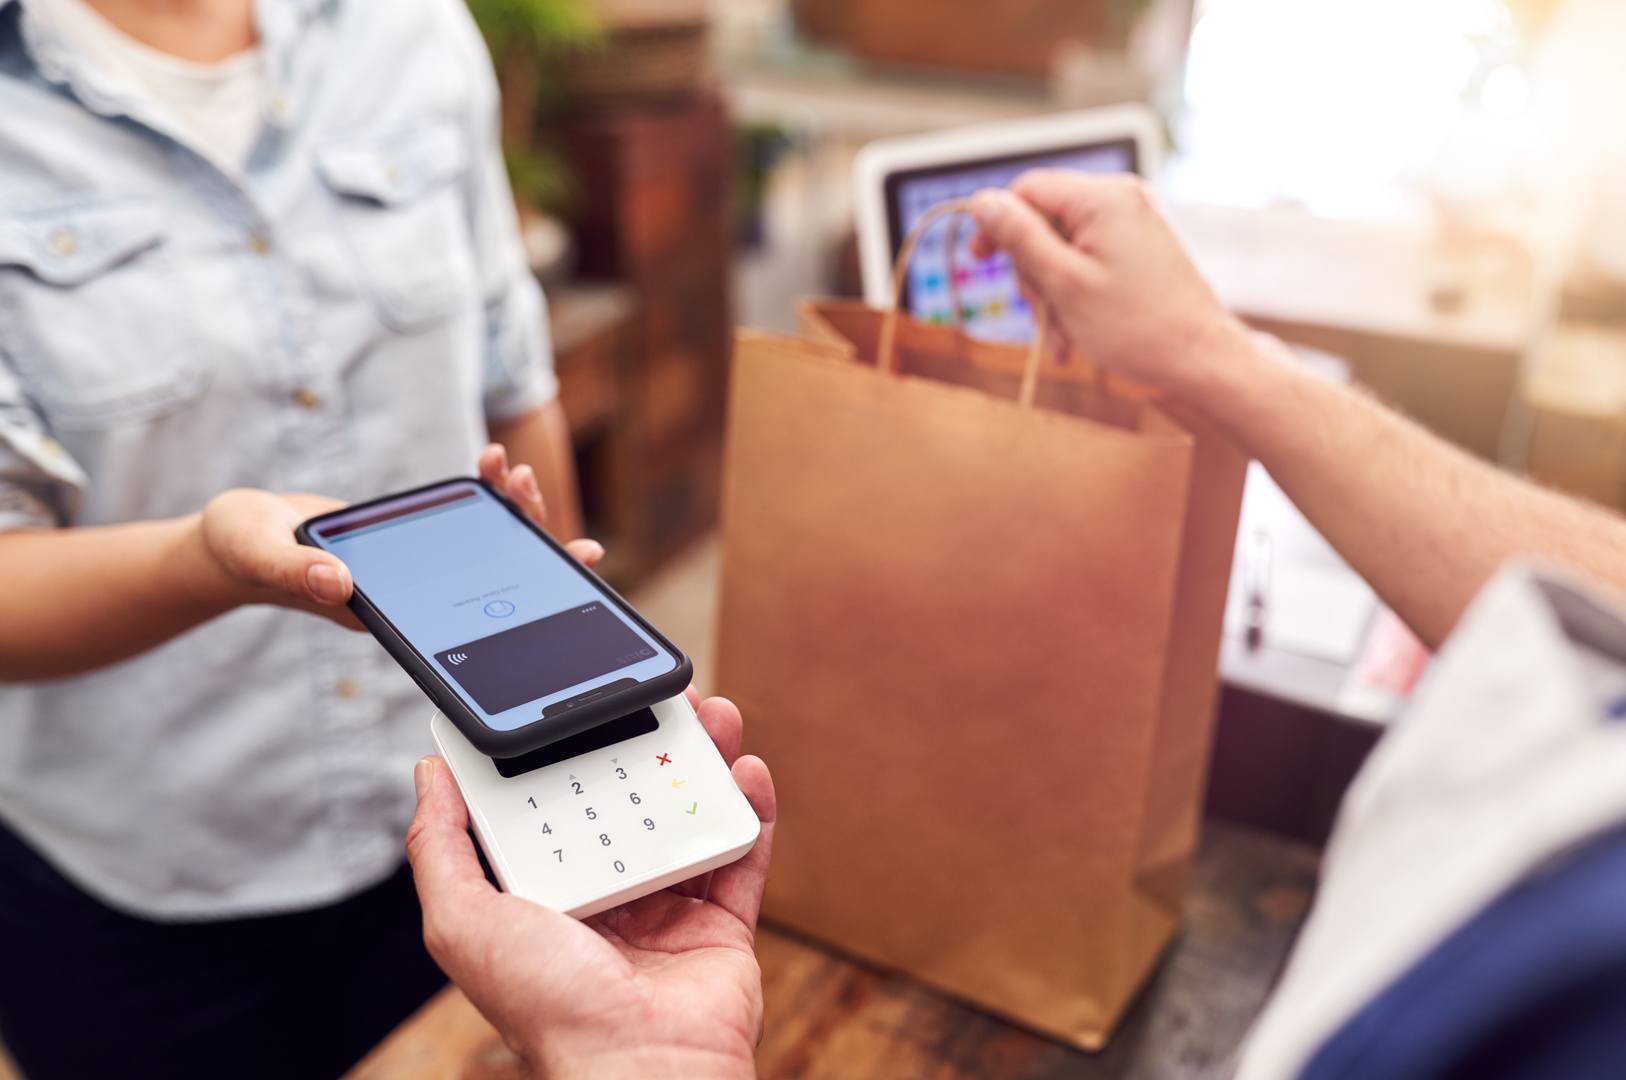 Brick-and-mortar business owners: Have you considered setting up contactless payments?